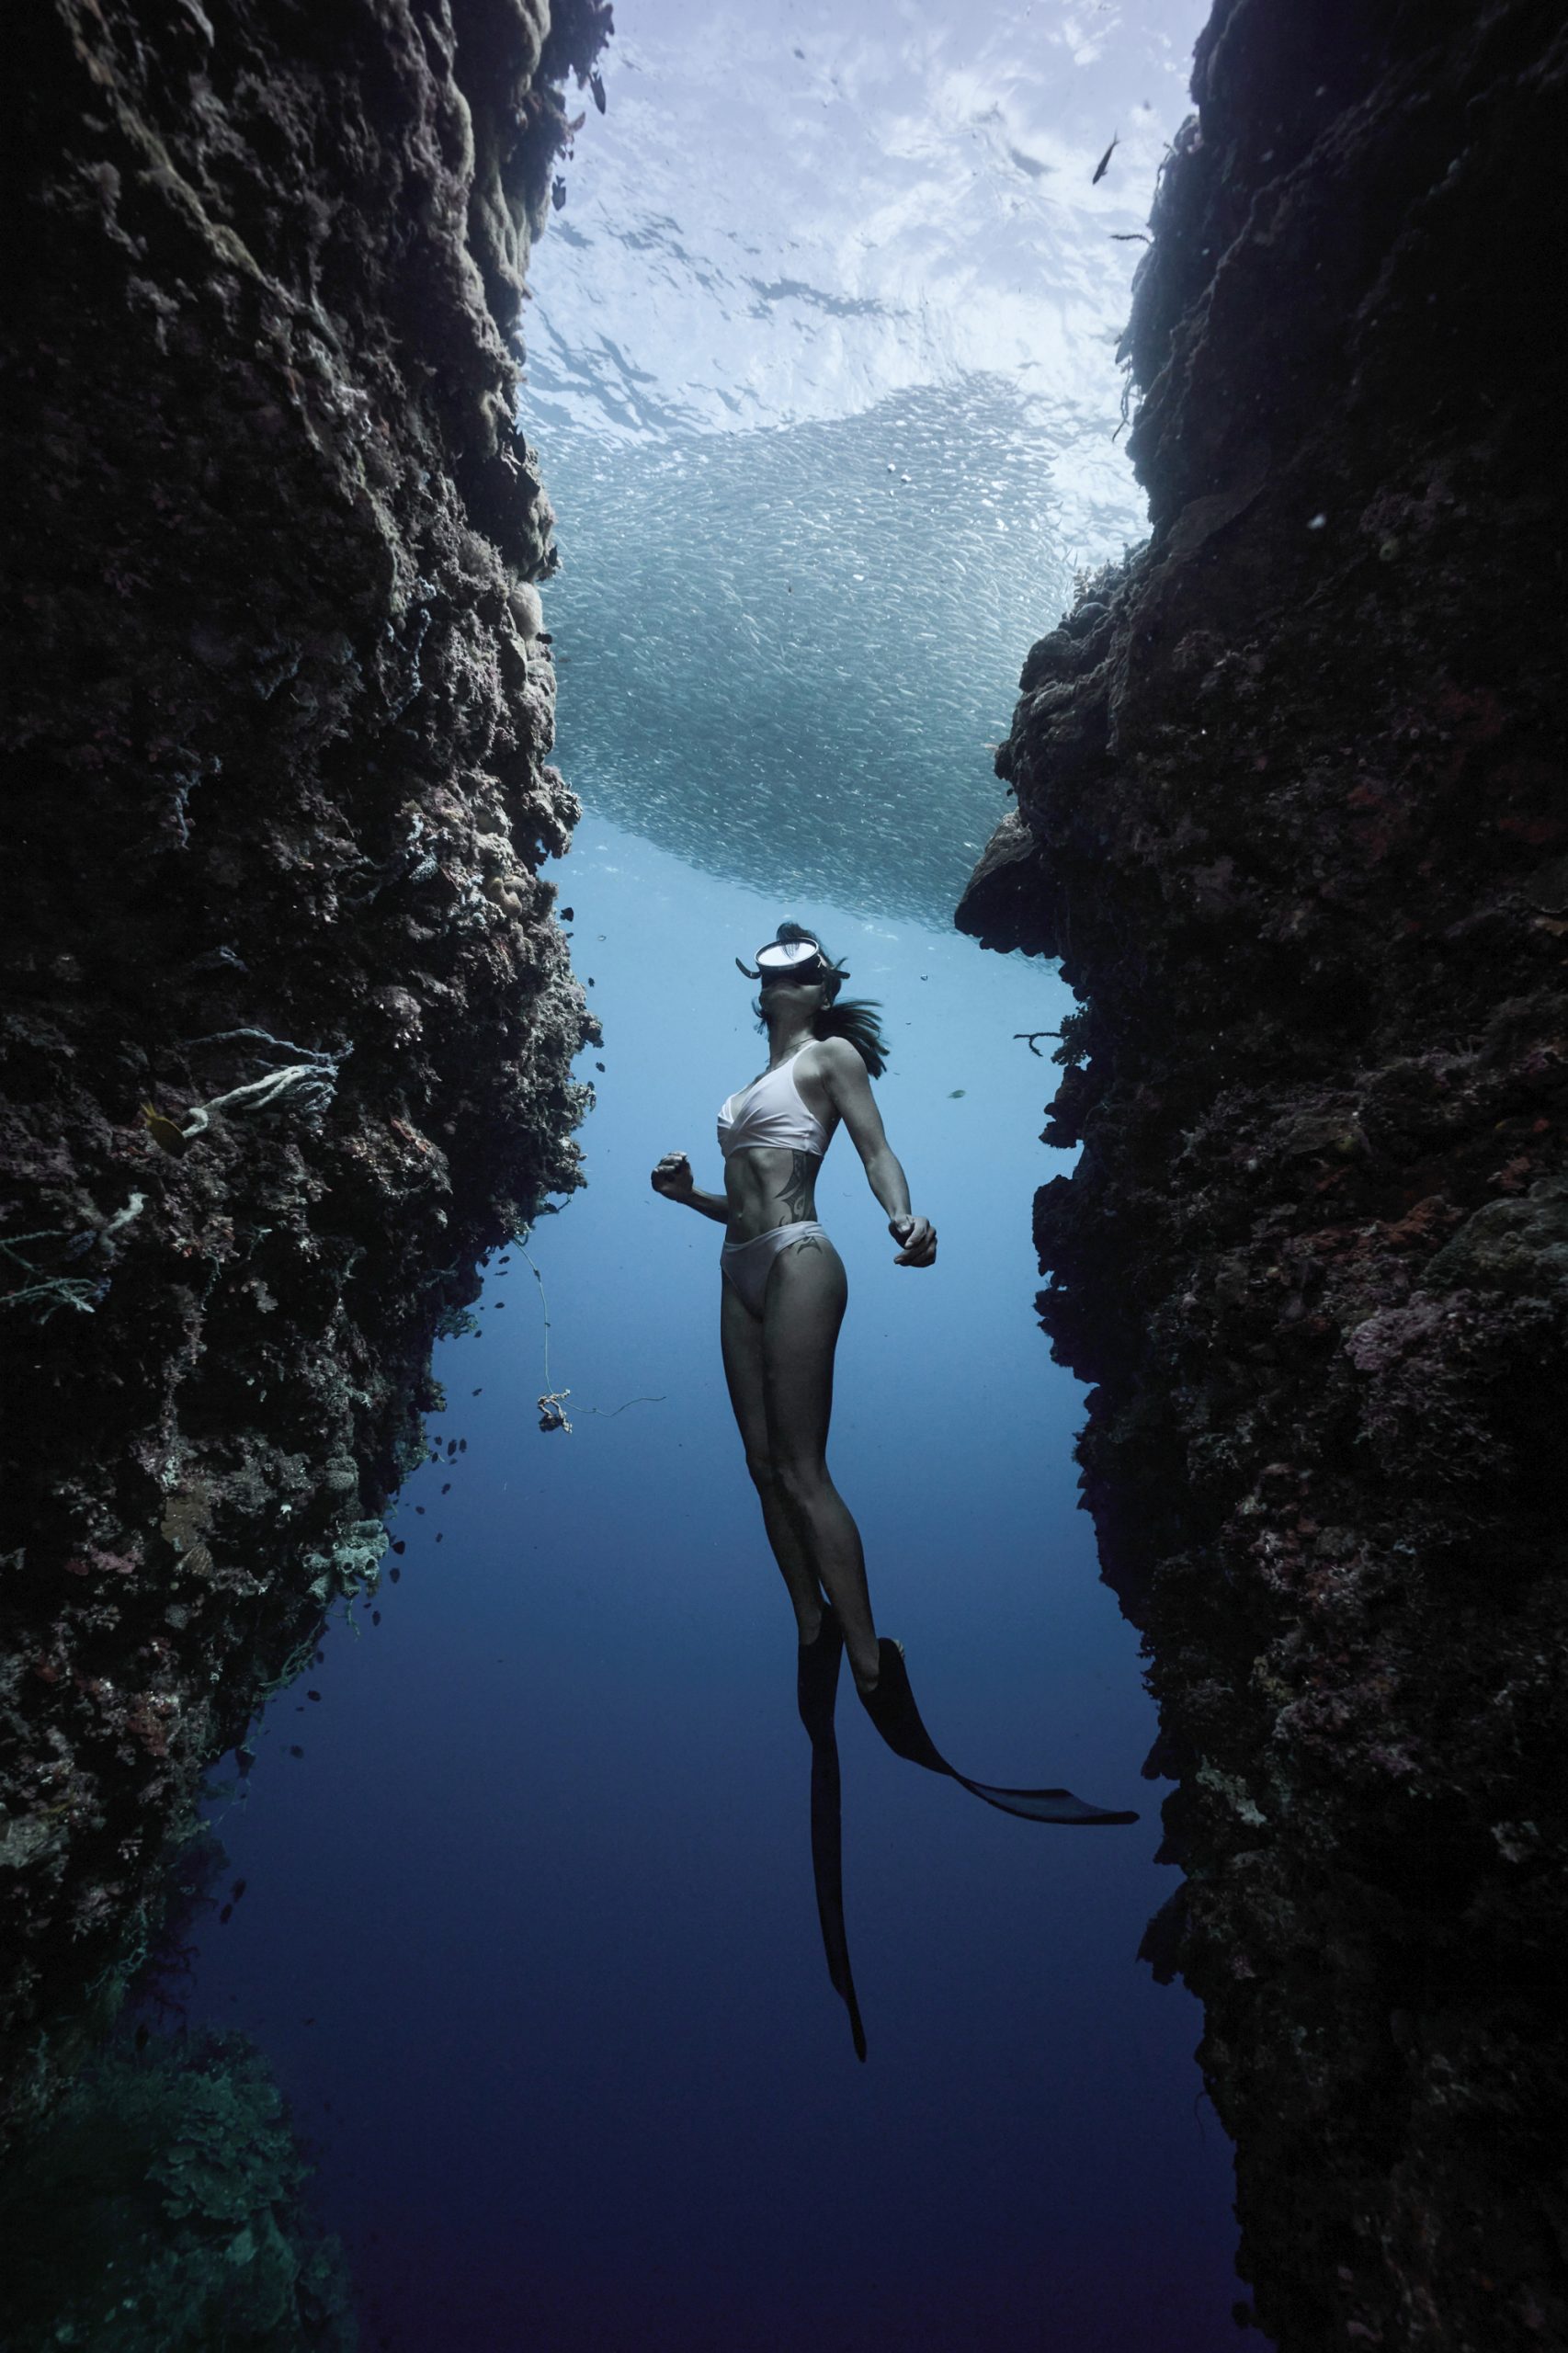 How do sports influence work life? Discover Elyss story, free-diver [Video]